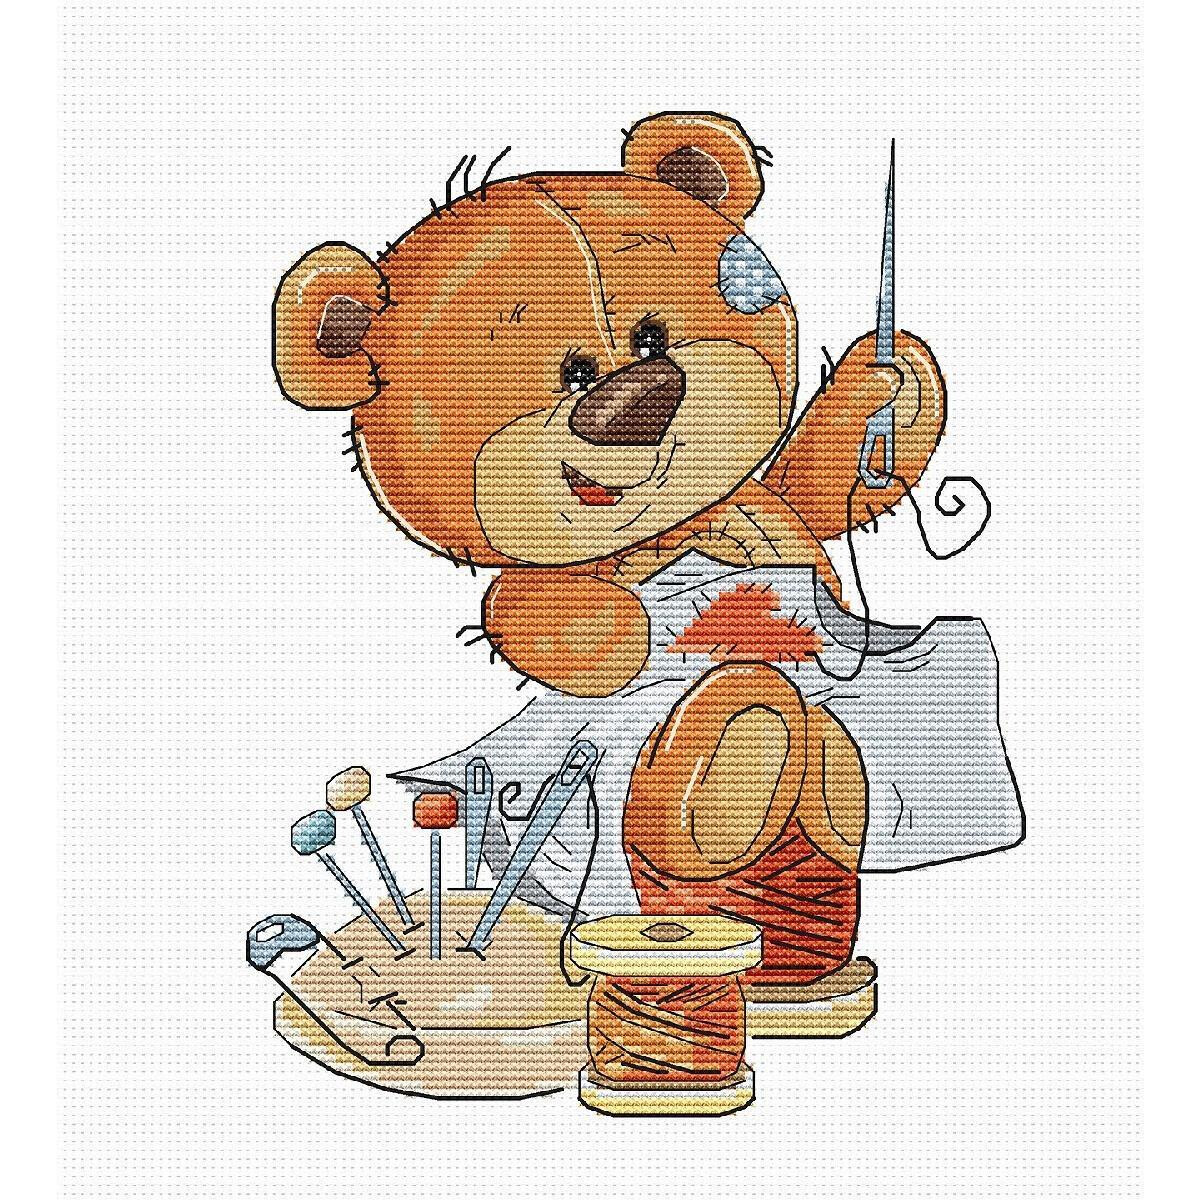 A detailed cross-stitch picture shows a cheerful teddy...